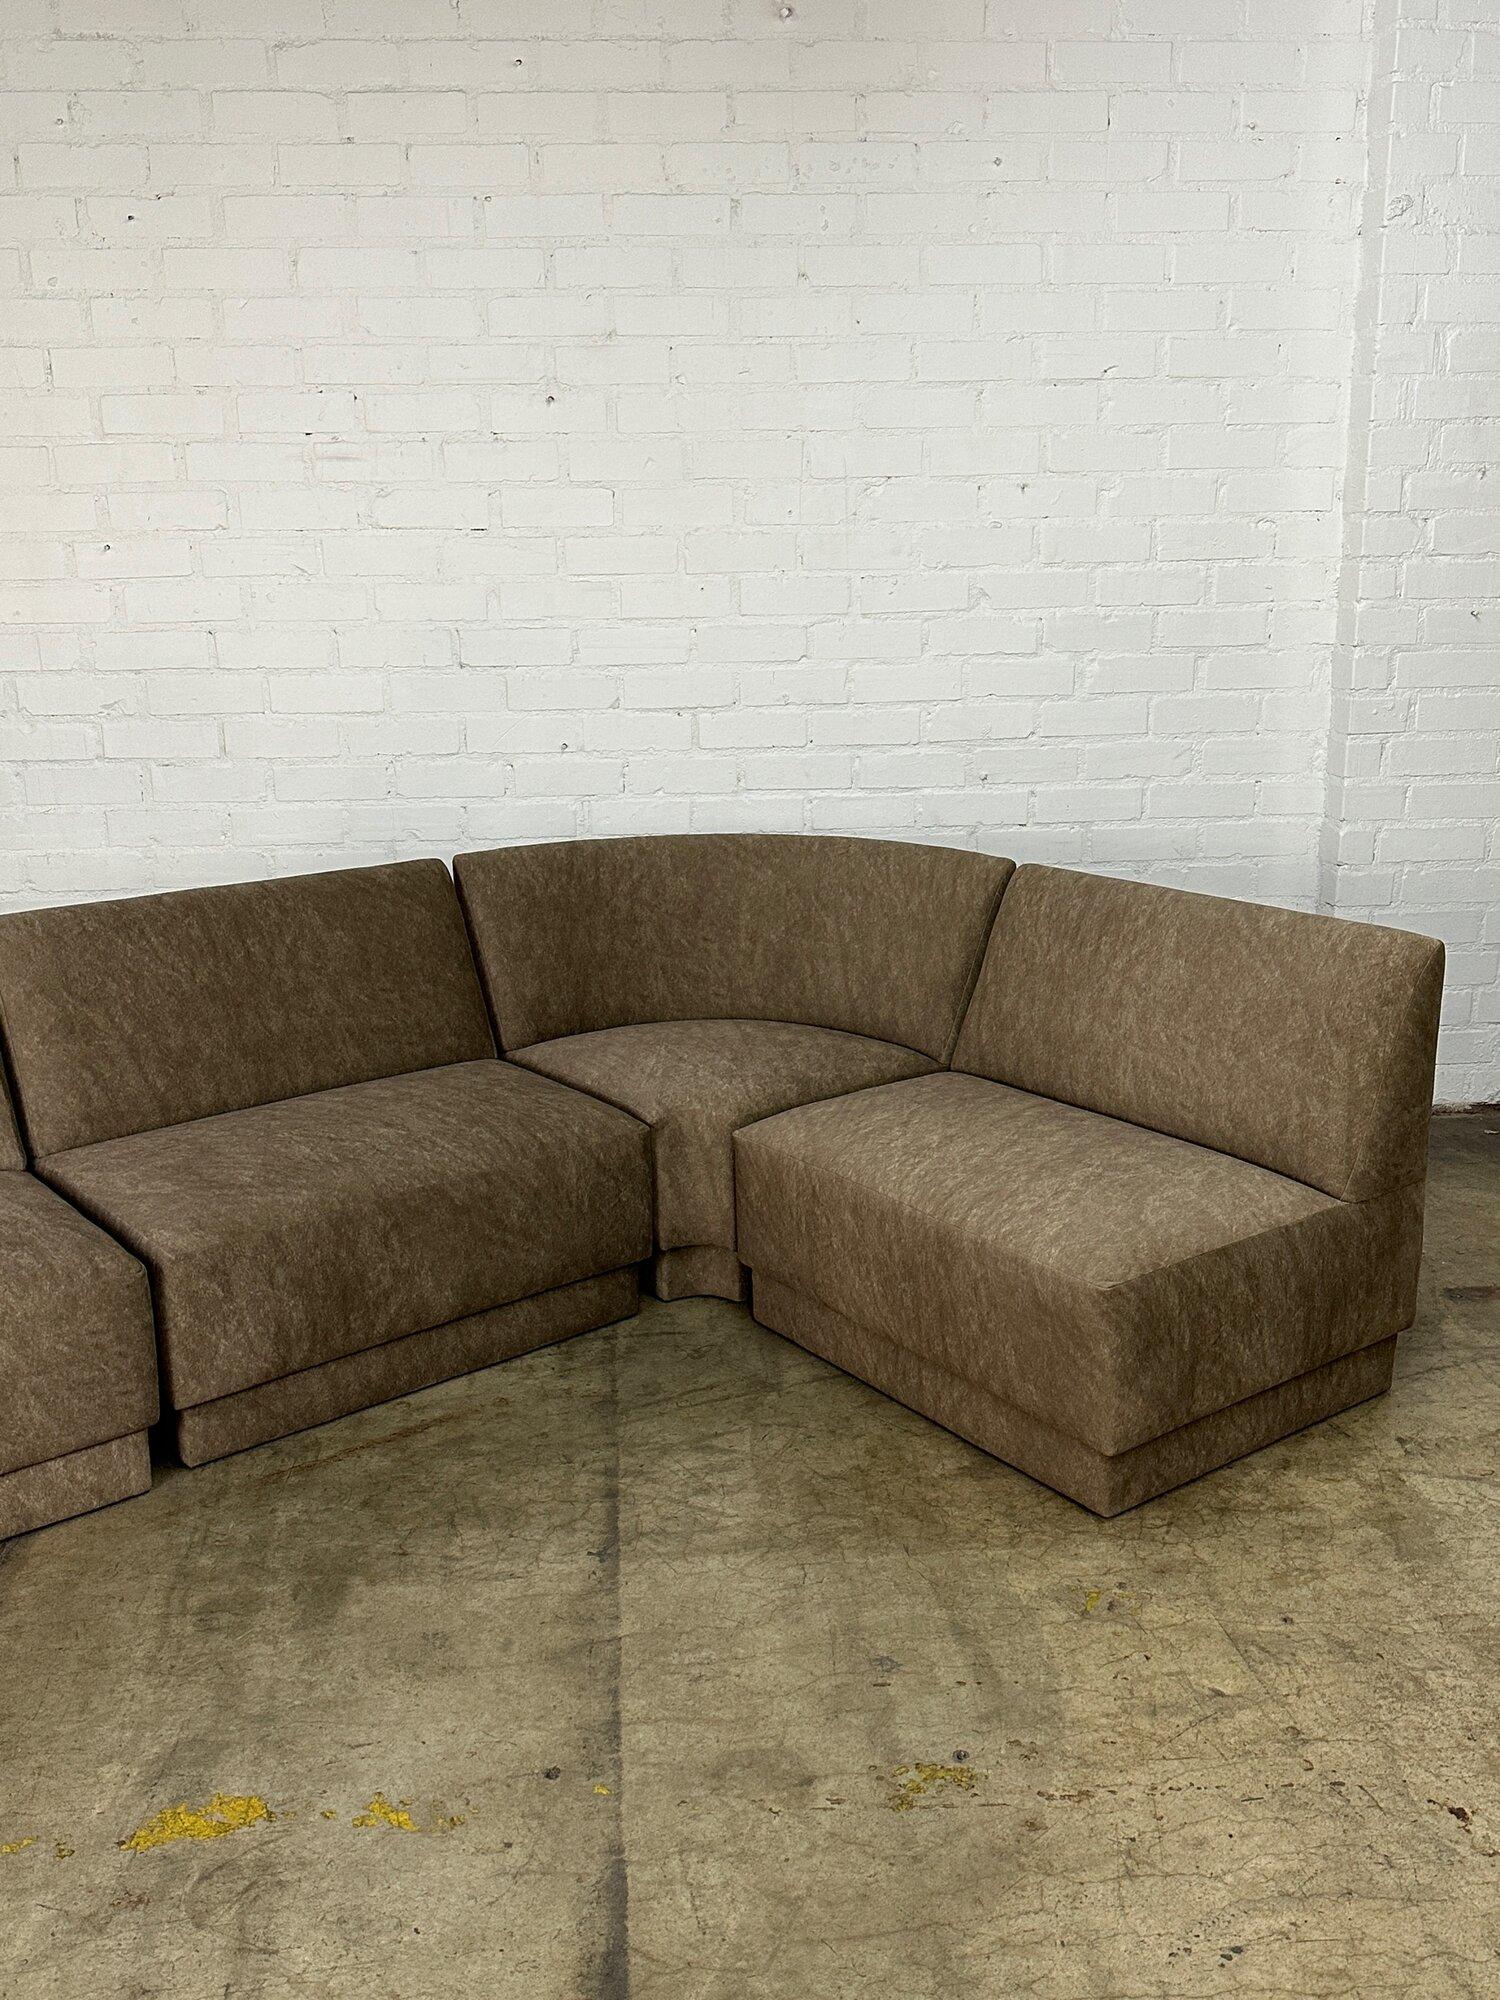 W118 D71 D30 H30 SW146 SD20 SH16

STRAIGHT PIECE W34 D30

Curve W47 D33

Fully upholstered modular seating with new foam. Each unit is freshly upholstered in a warm grey patterned smooth velvet. Price is four the set as pictured. 